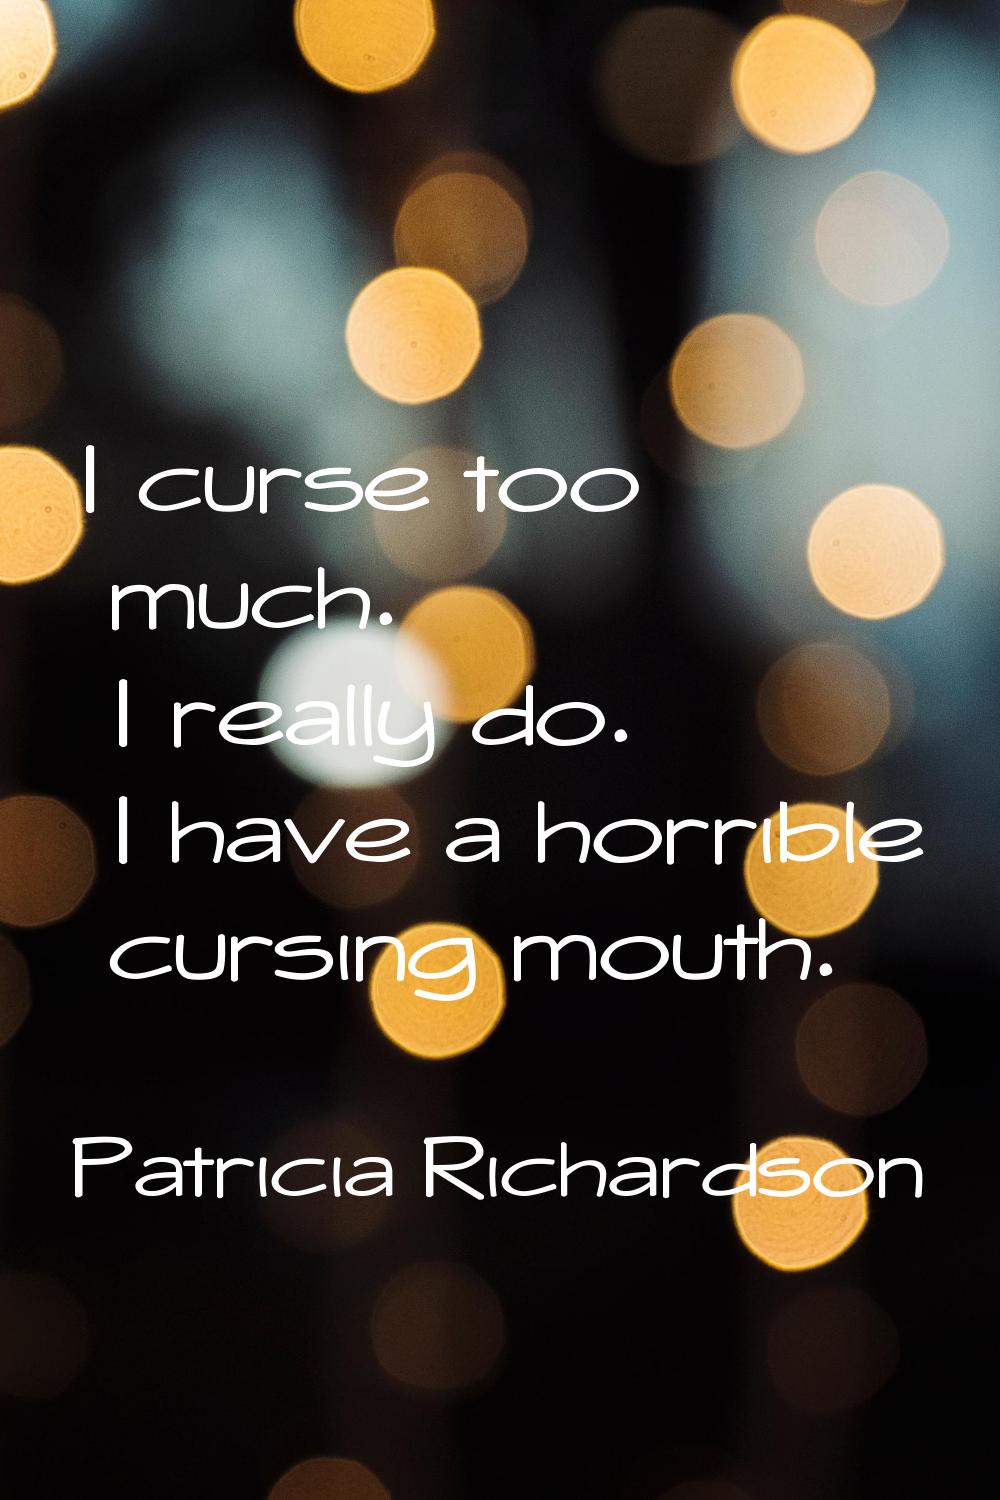 I curse too much. I really do. I have a horrible cursing mouth.